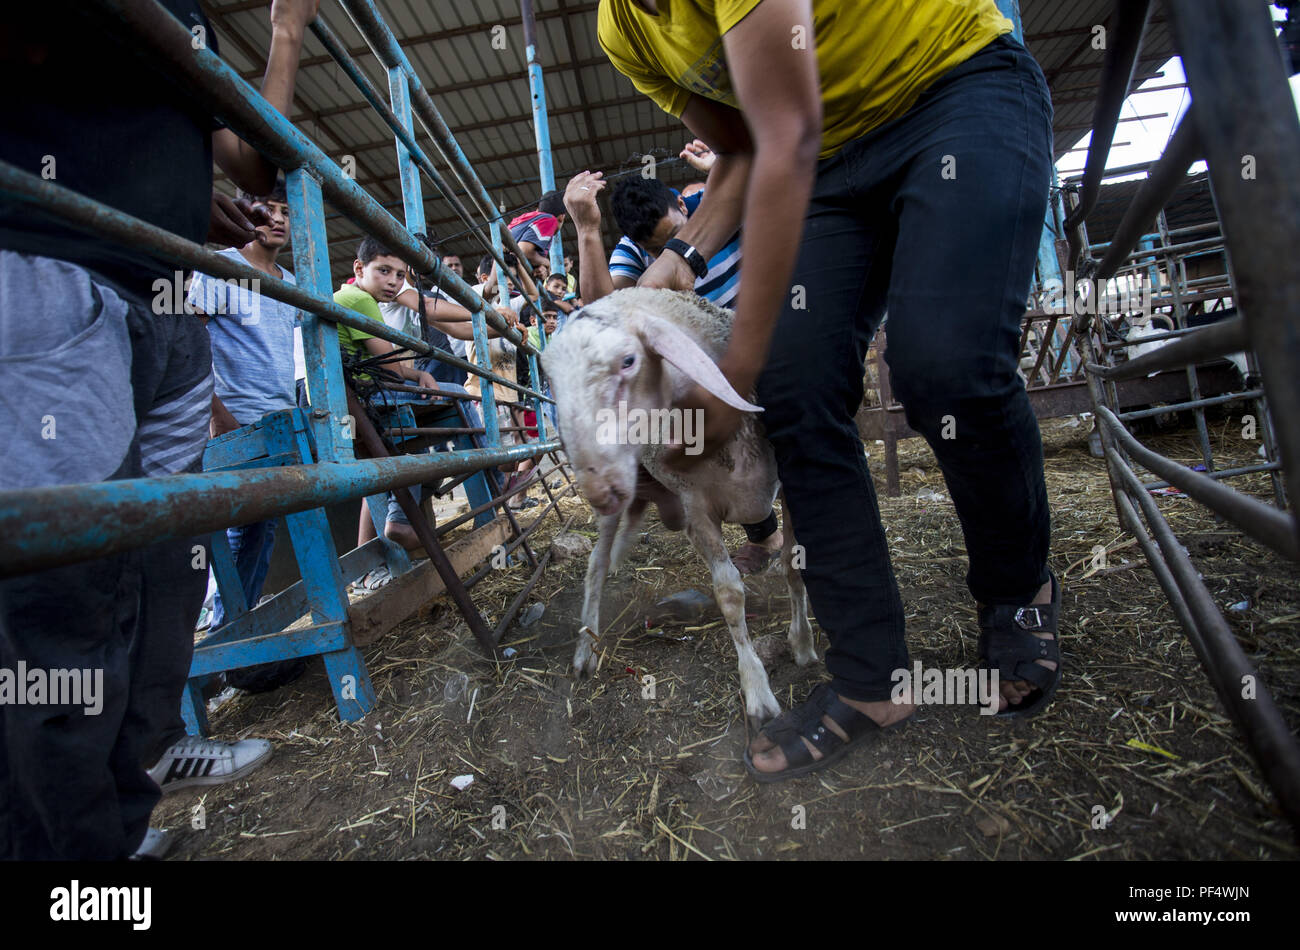 Gaza City, The Gaza Strip, Gaza. 18th Aug, 2018. A farmer seen trying to get a sheep under control and deliver it to his customer.Palestinians gather in a cattle shop to purchase cattles to be sacrificed. before Eid al-Adha in the east of Jabalya refugee camp. Eid al-Adha (Festival of Sacrifice) is celebrated throughout the Islamic world as the commemoration of Abraham's will to sacrifice his son for God, cows, camels, goats and sheep are traditionally slaughtered on the Holy Day. Credit: Mahmoud Issa/SOPA Images/ZUMA Wire/Alamy Live News Stock Photo